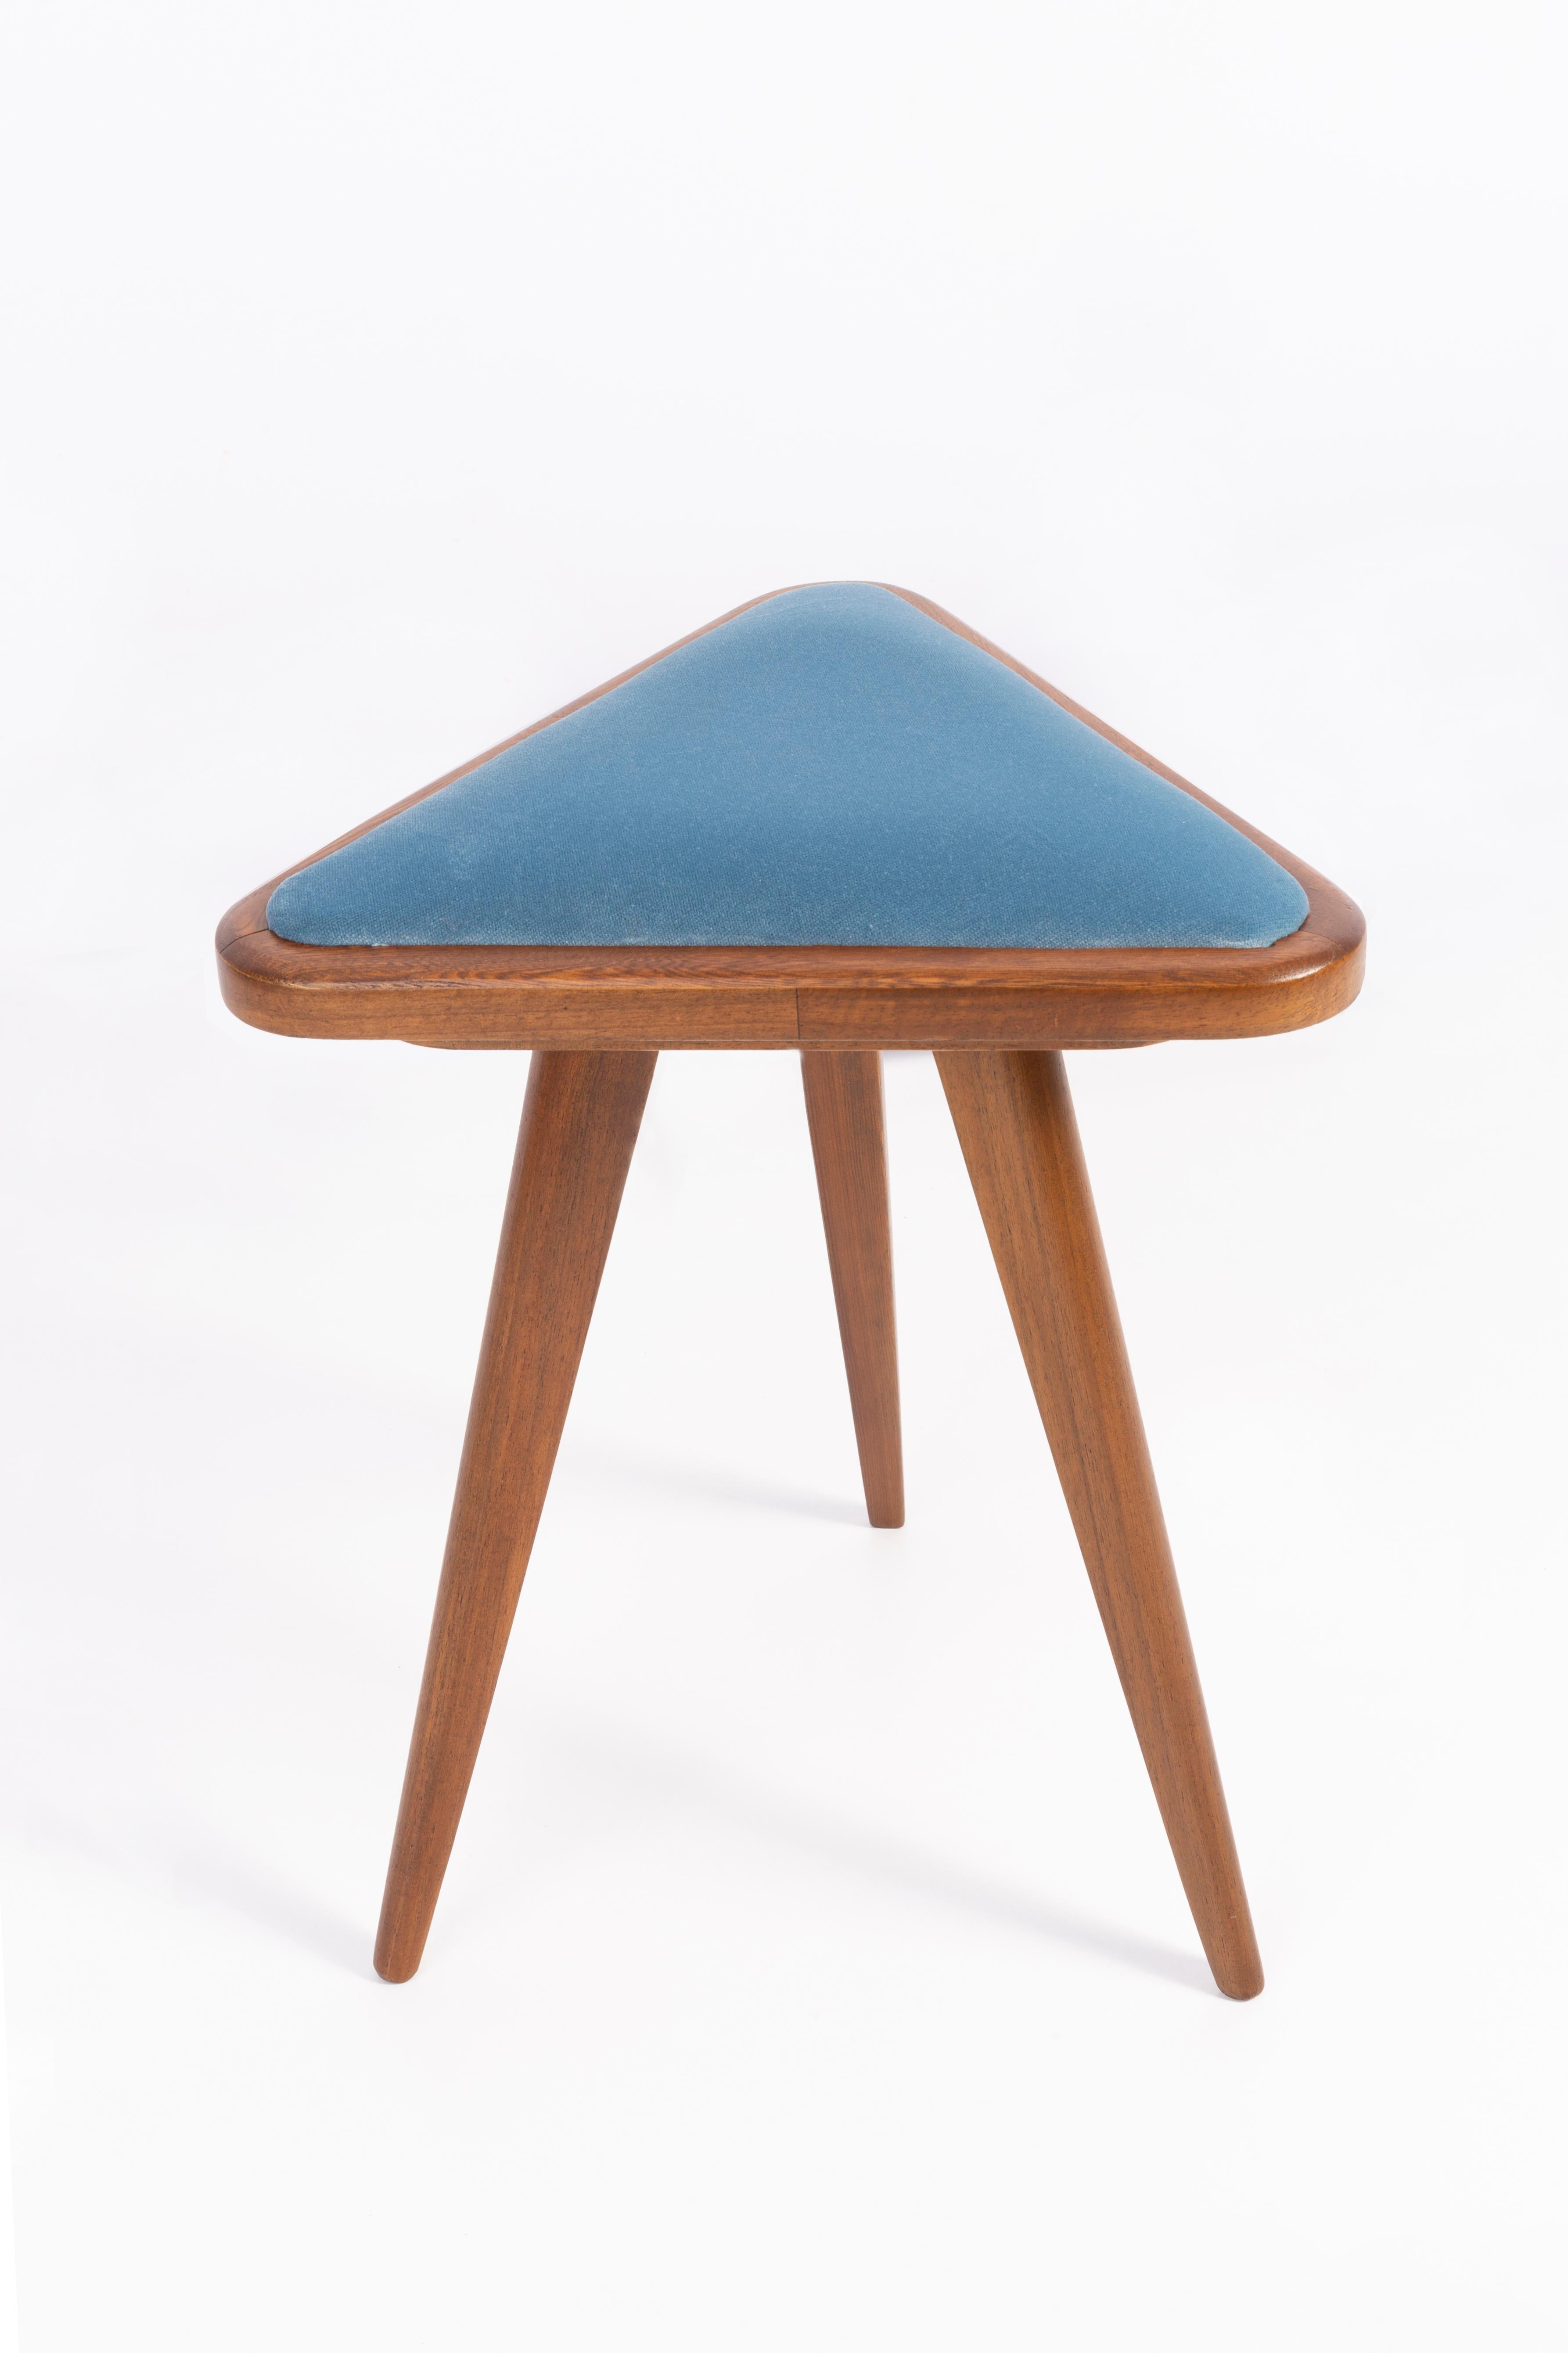 Hand-Crafted Set of Two Blue Velvet 20th Century Triangle Stools, Europe, 1960s For Sale